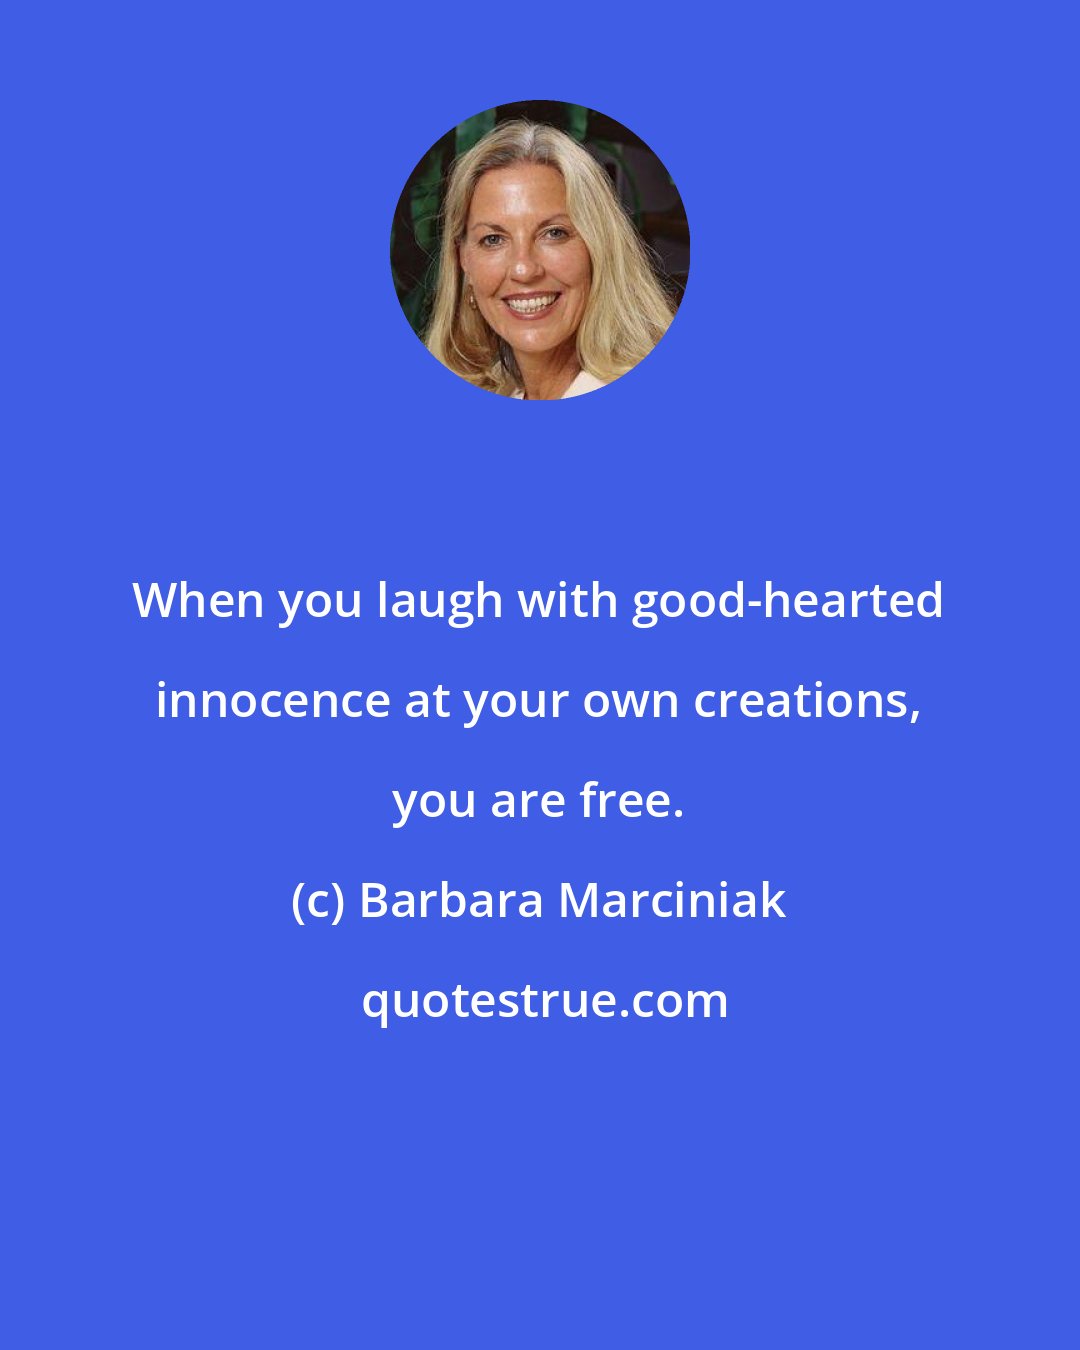 Barbara Marciniak: When you laugh with good-hearted innocence at your own creations, you are free.